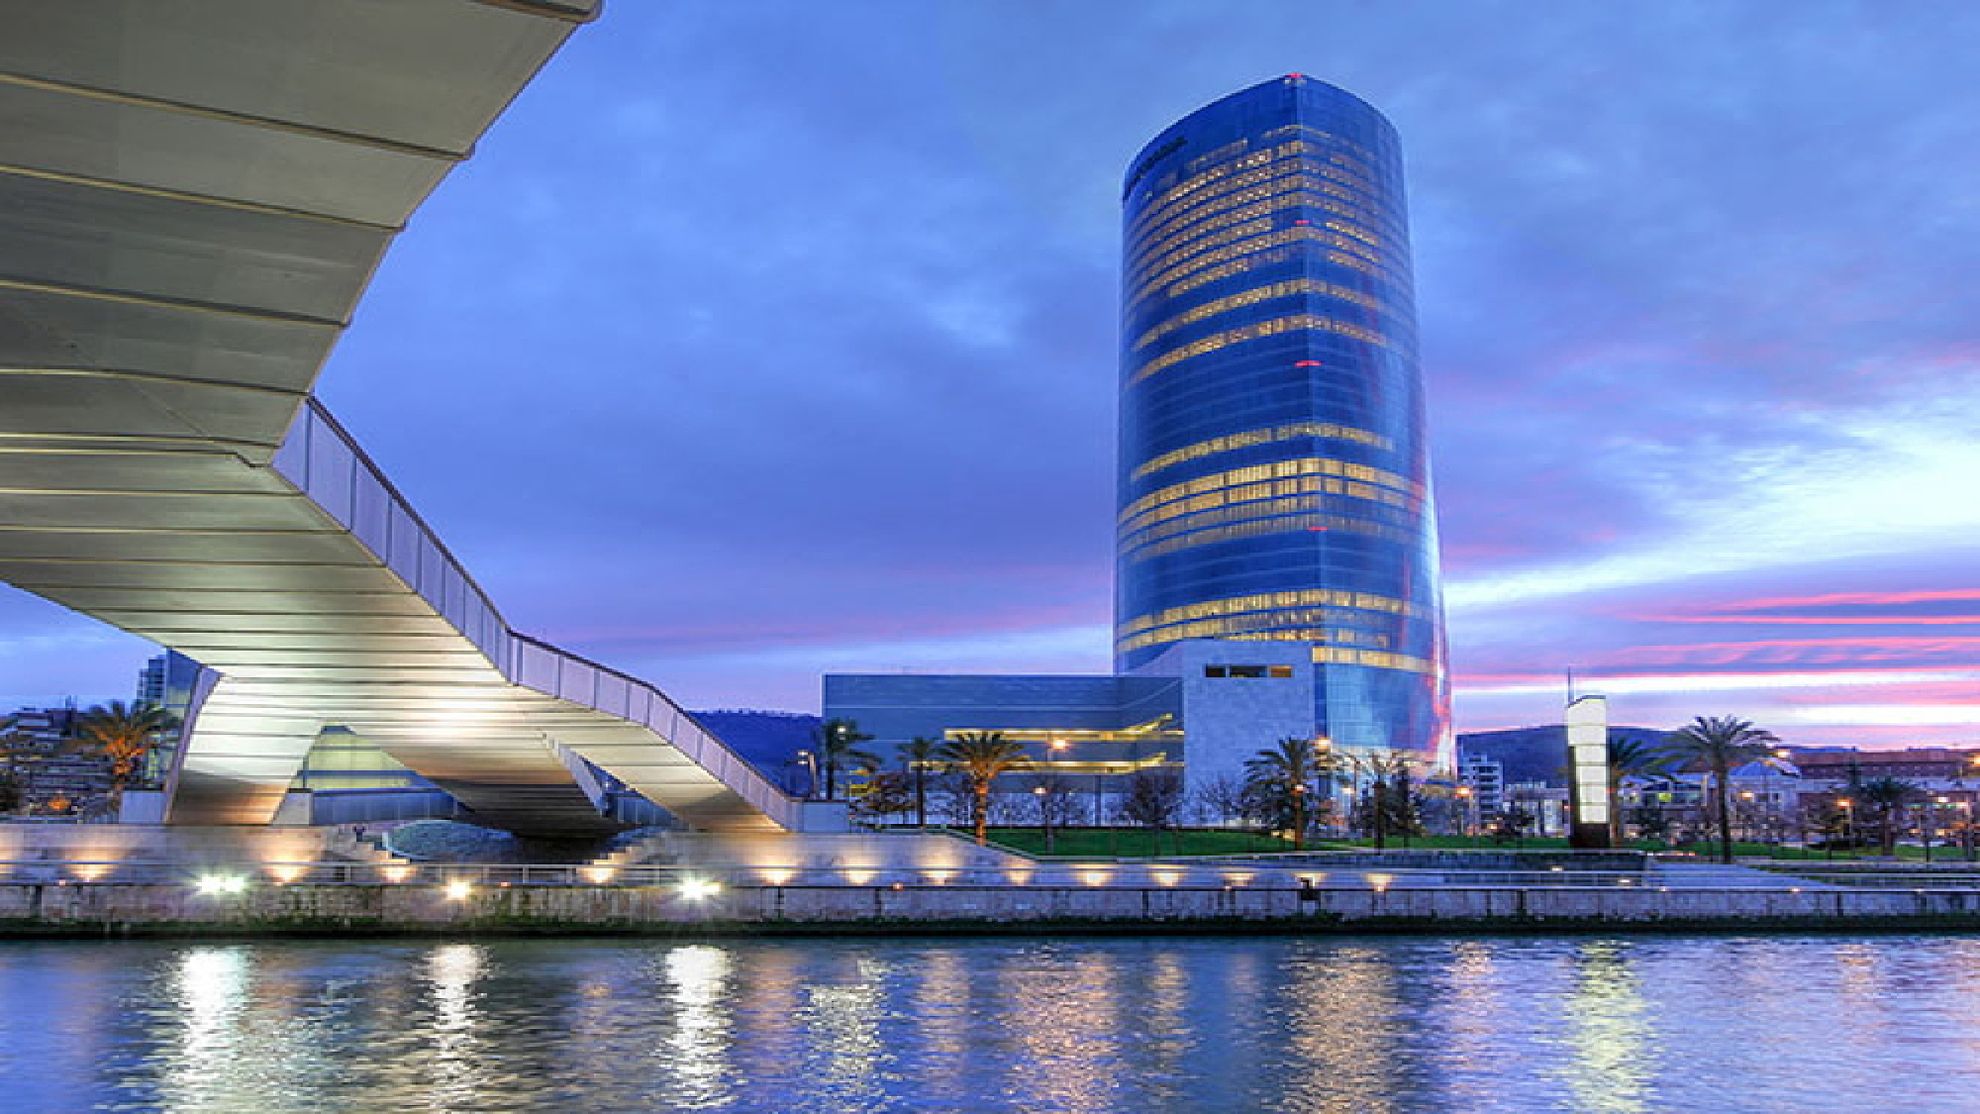 Iberdrola tower in Bilbao, Spain. (Photo internet reproduction)